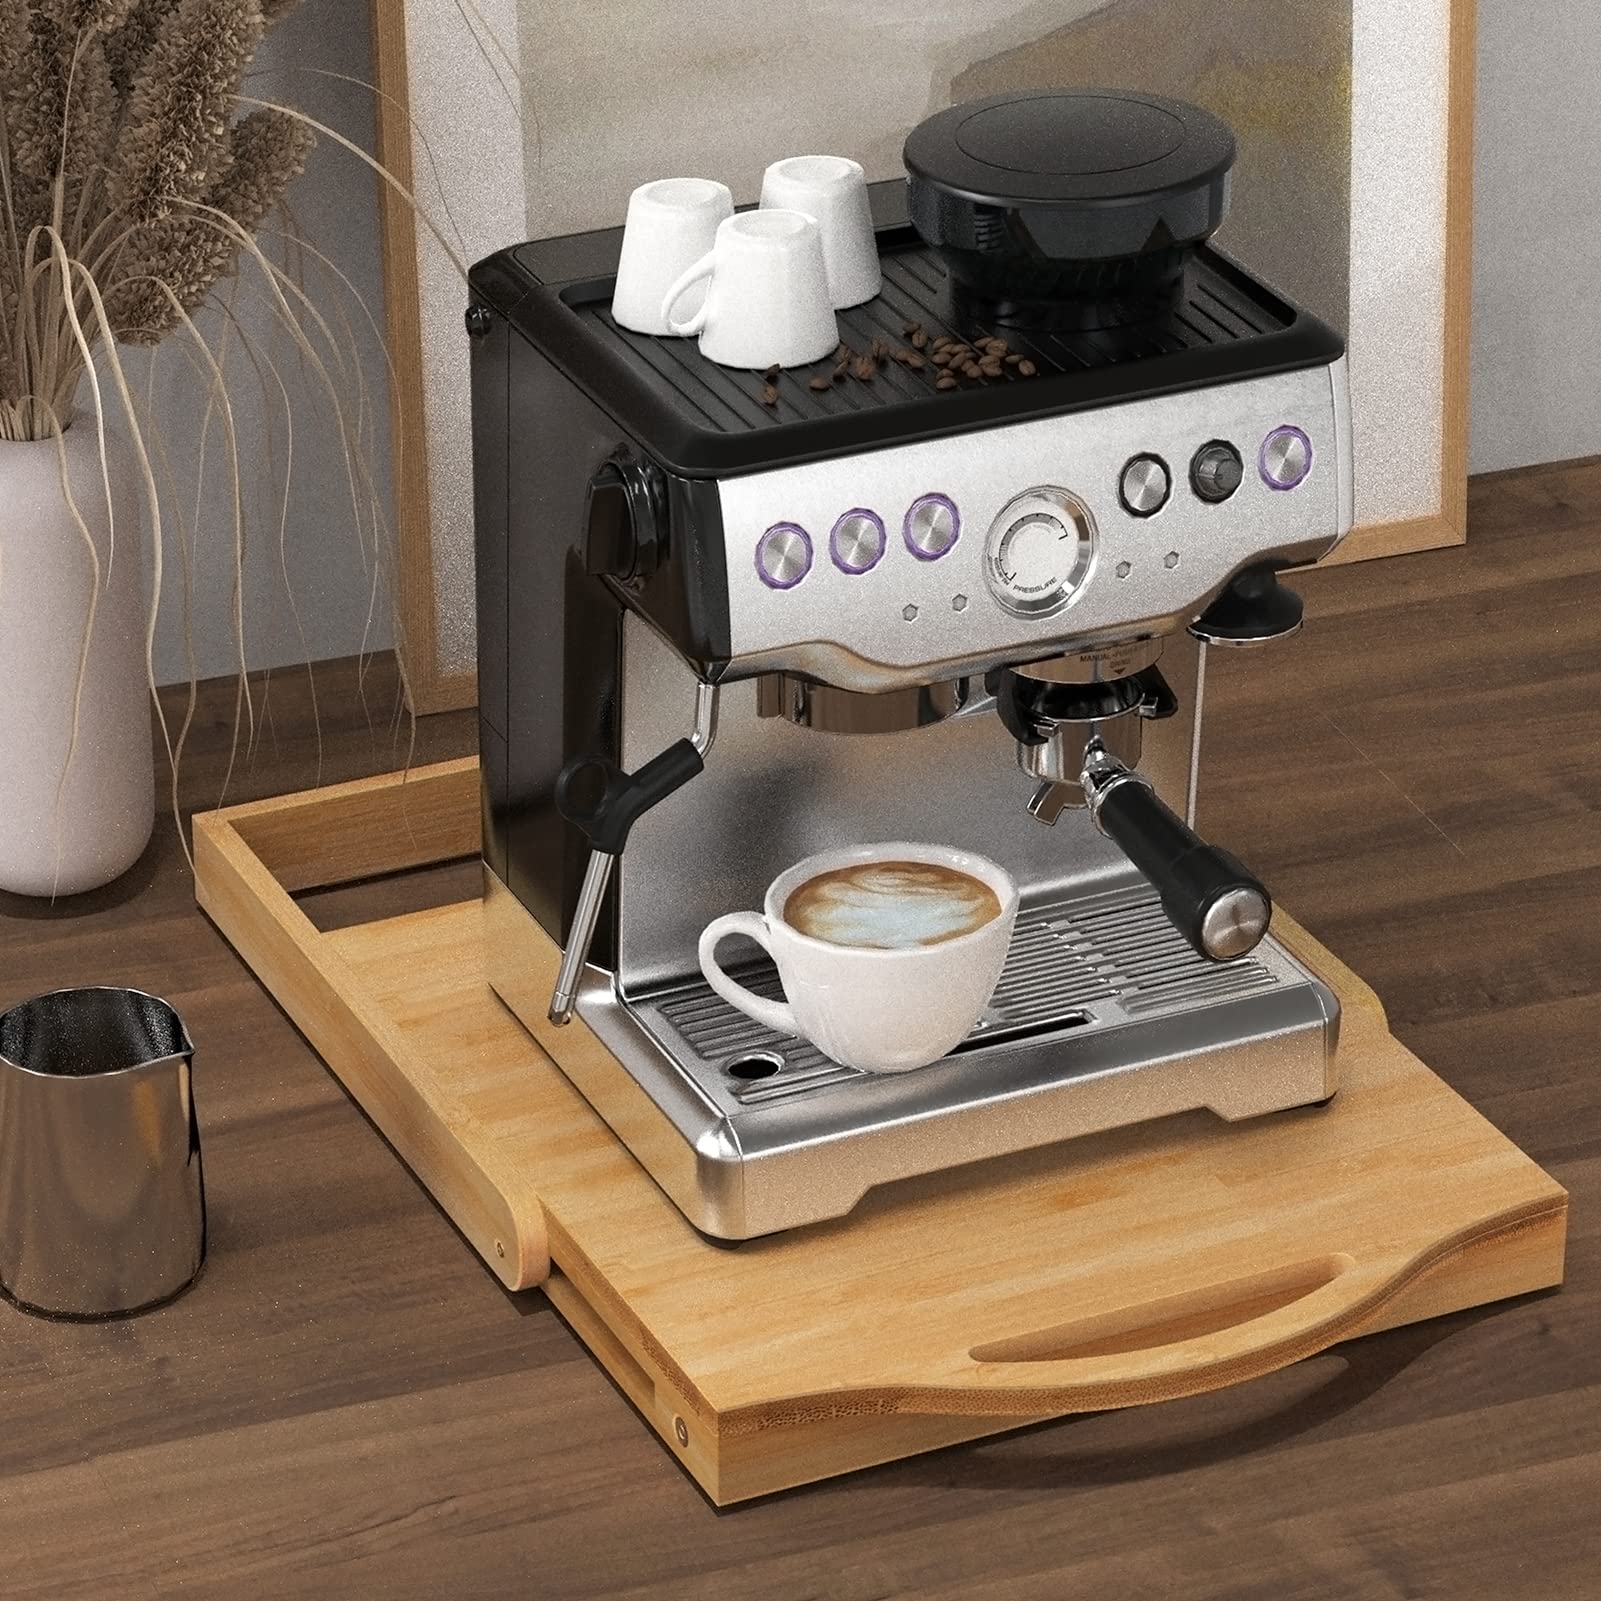 tonchean Kitchen Bamboo Sliding Tray Rolling Appliance Slider 26  Countertop Organizer for Coffee Maker and more, Gifts 